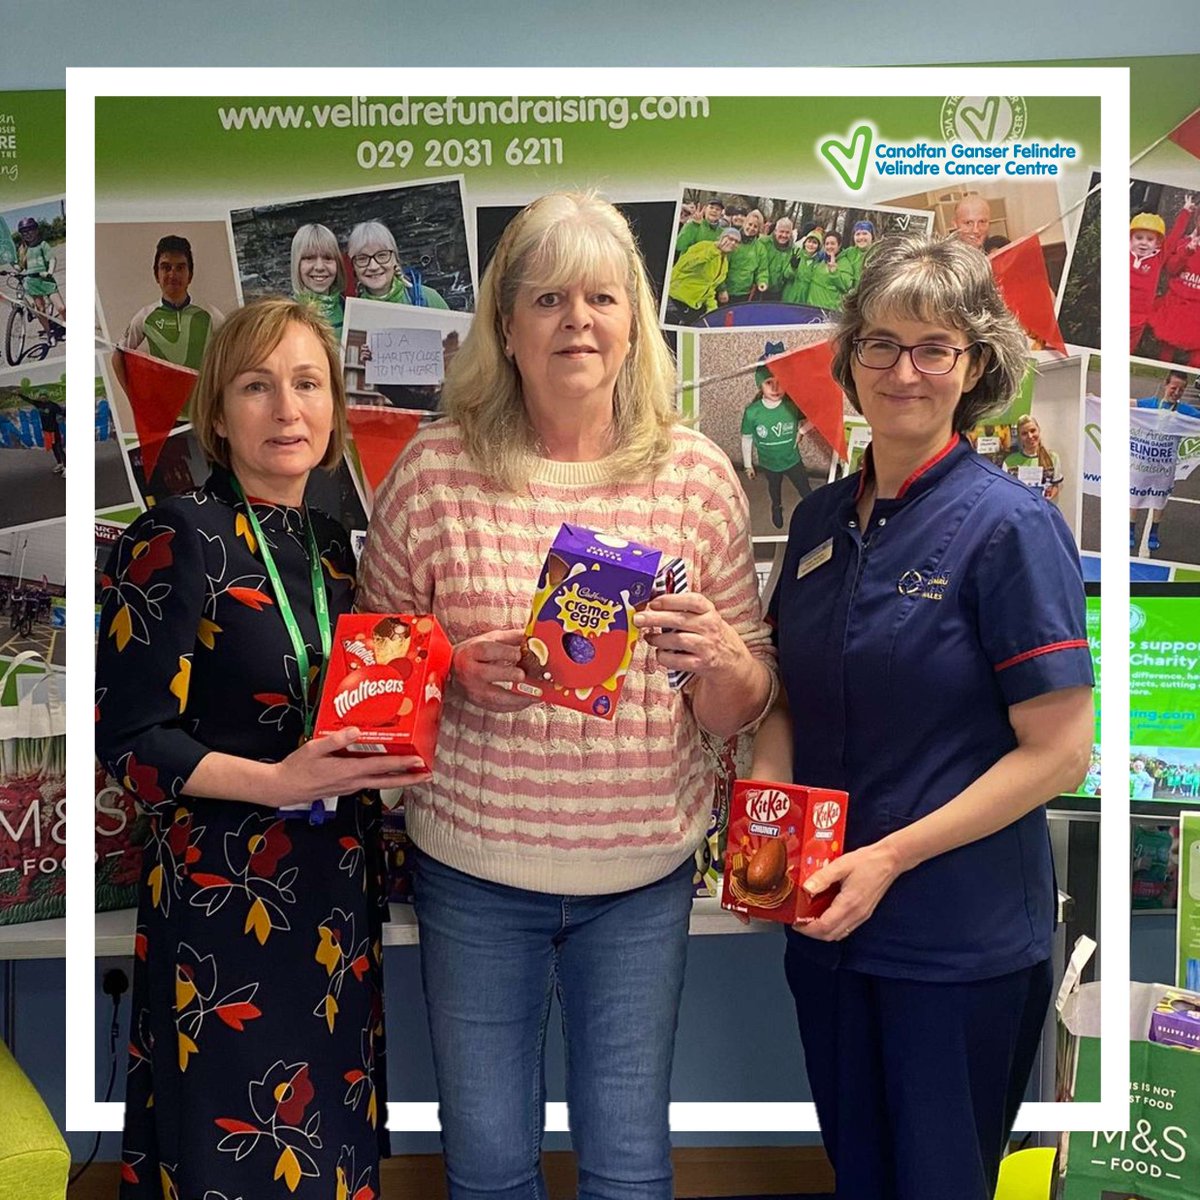 💚 Huge thanks to the staff and patrons of the Toby Carvery Whitchurch who very kindly donated 60 Easter Eggs for our staff and patients this week. Our patients and staff’s faces lit up when they saw the chocolate! 😊